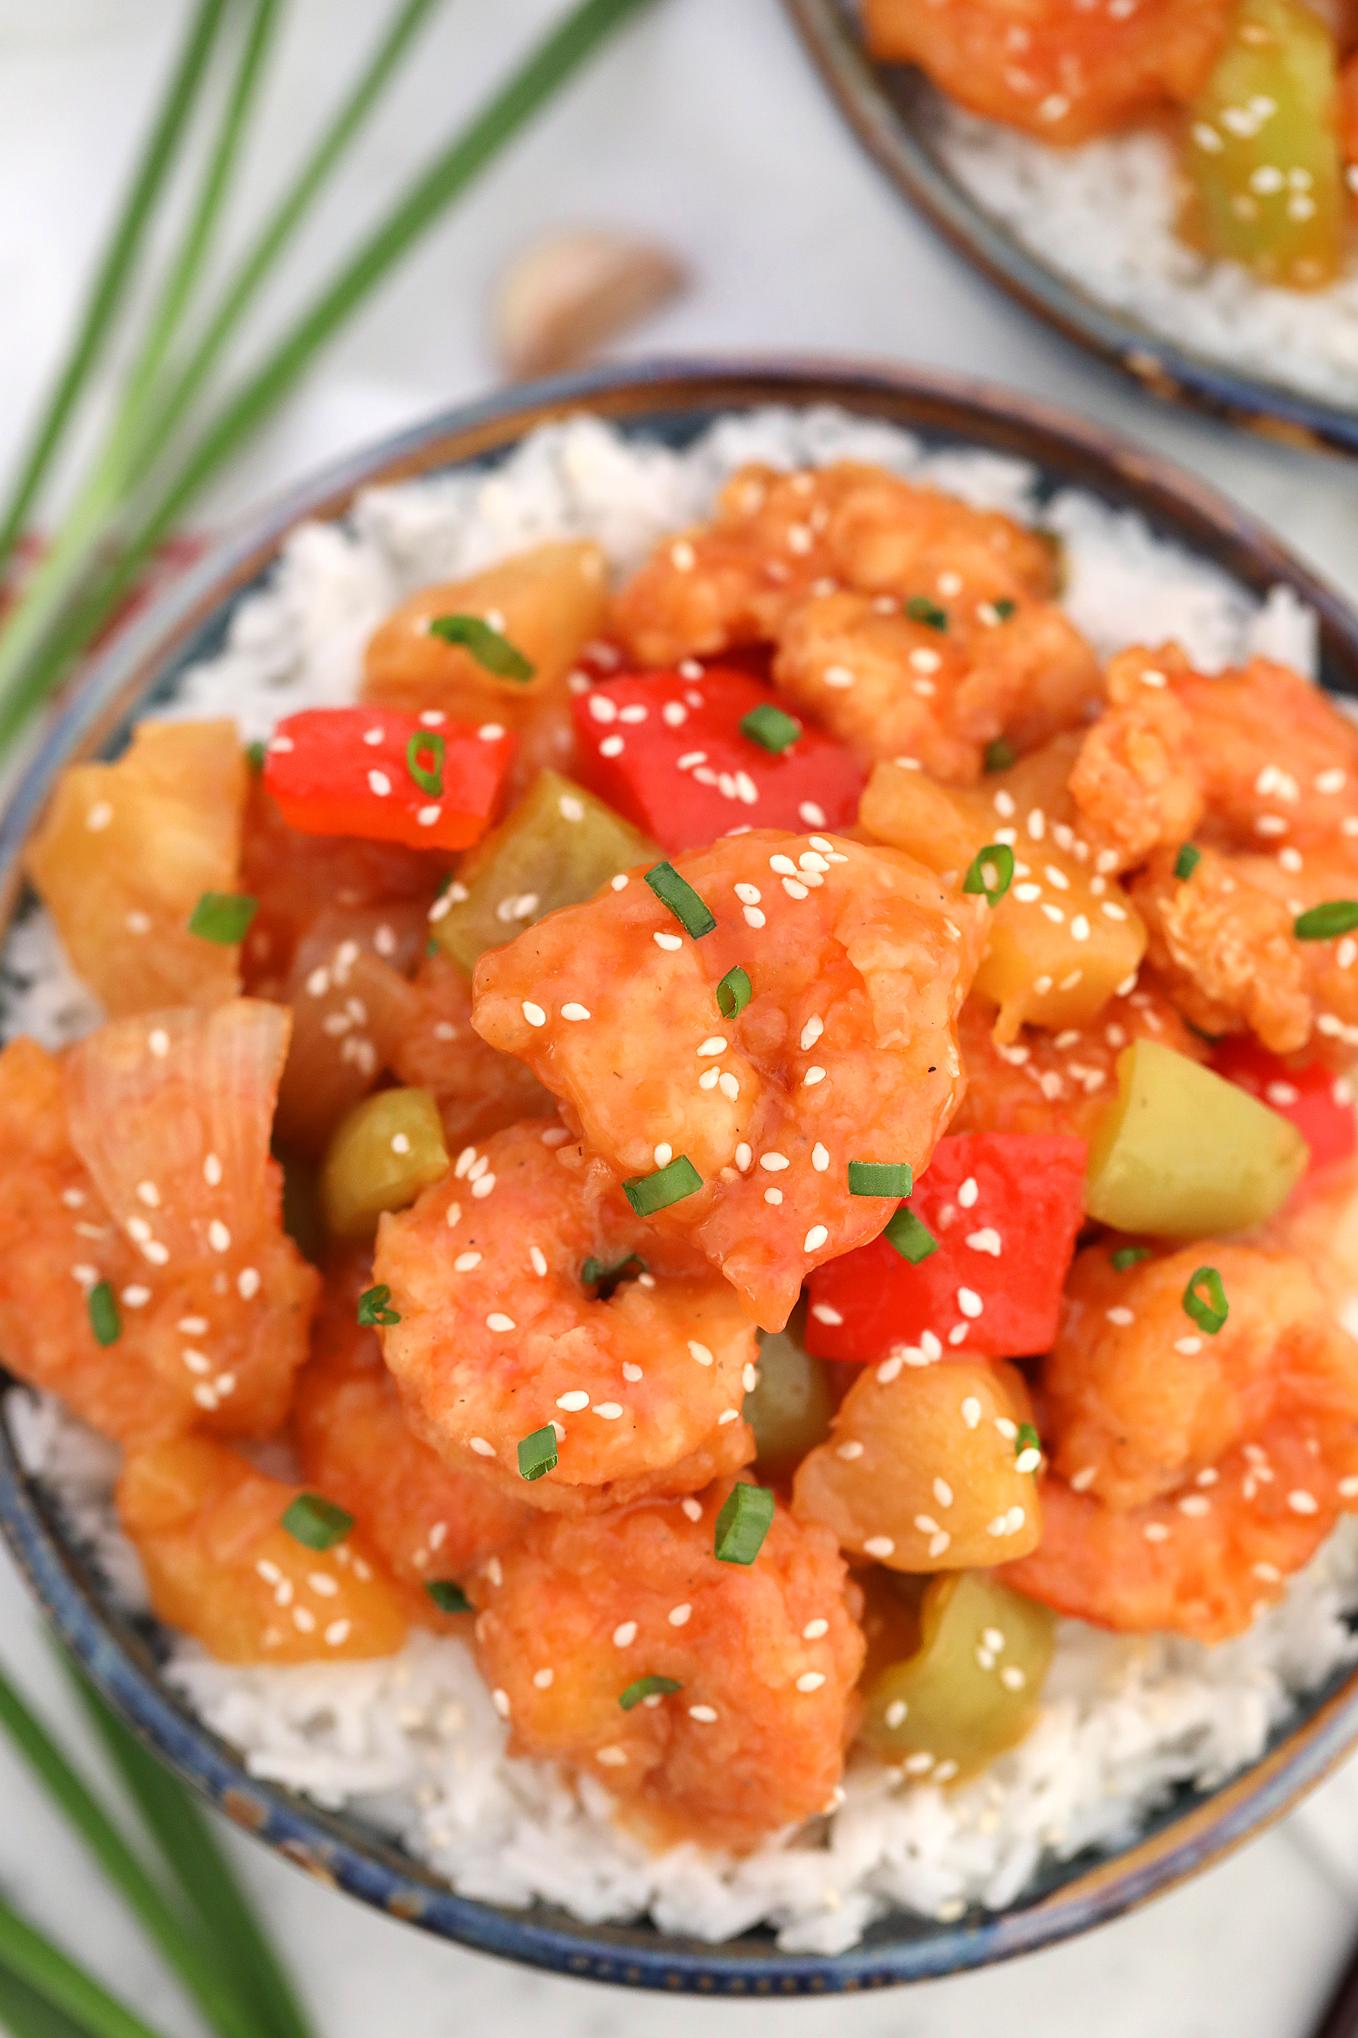  Sweet, sour and shrimp - the perfect flavor trifecta.